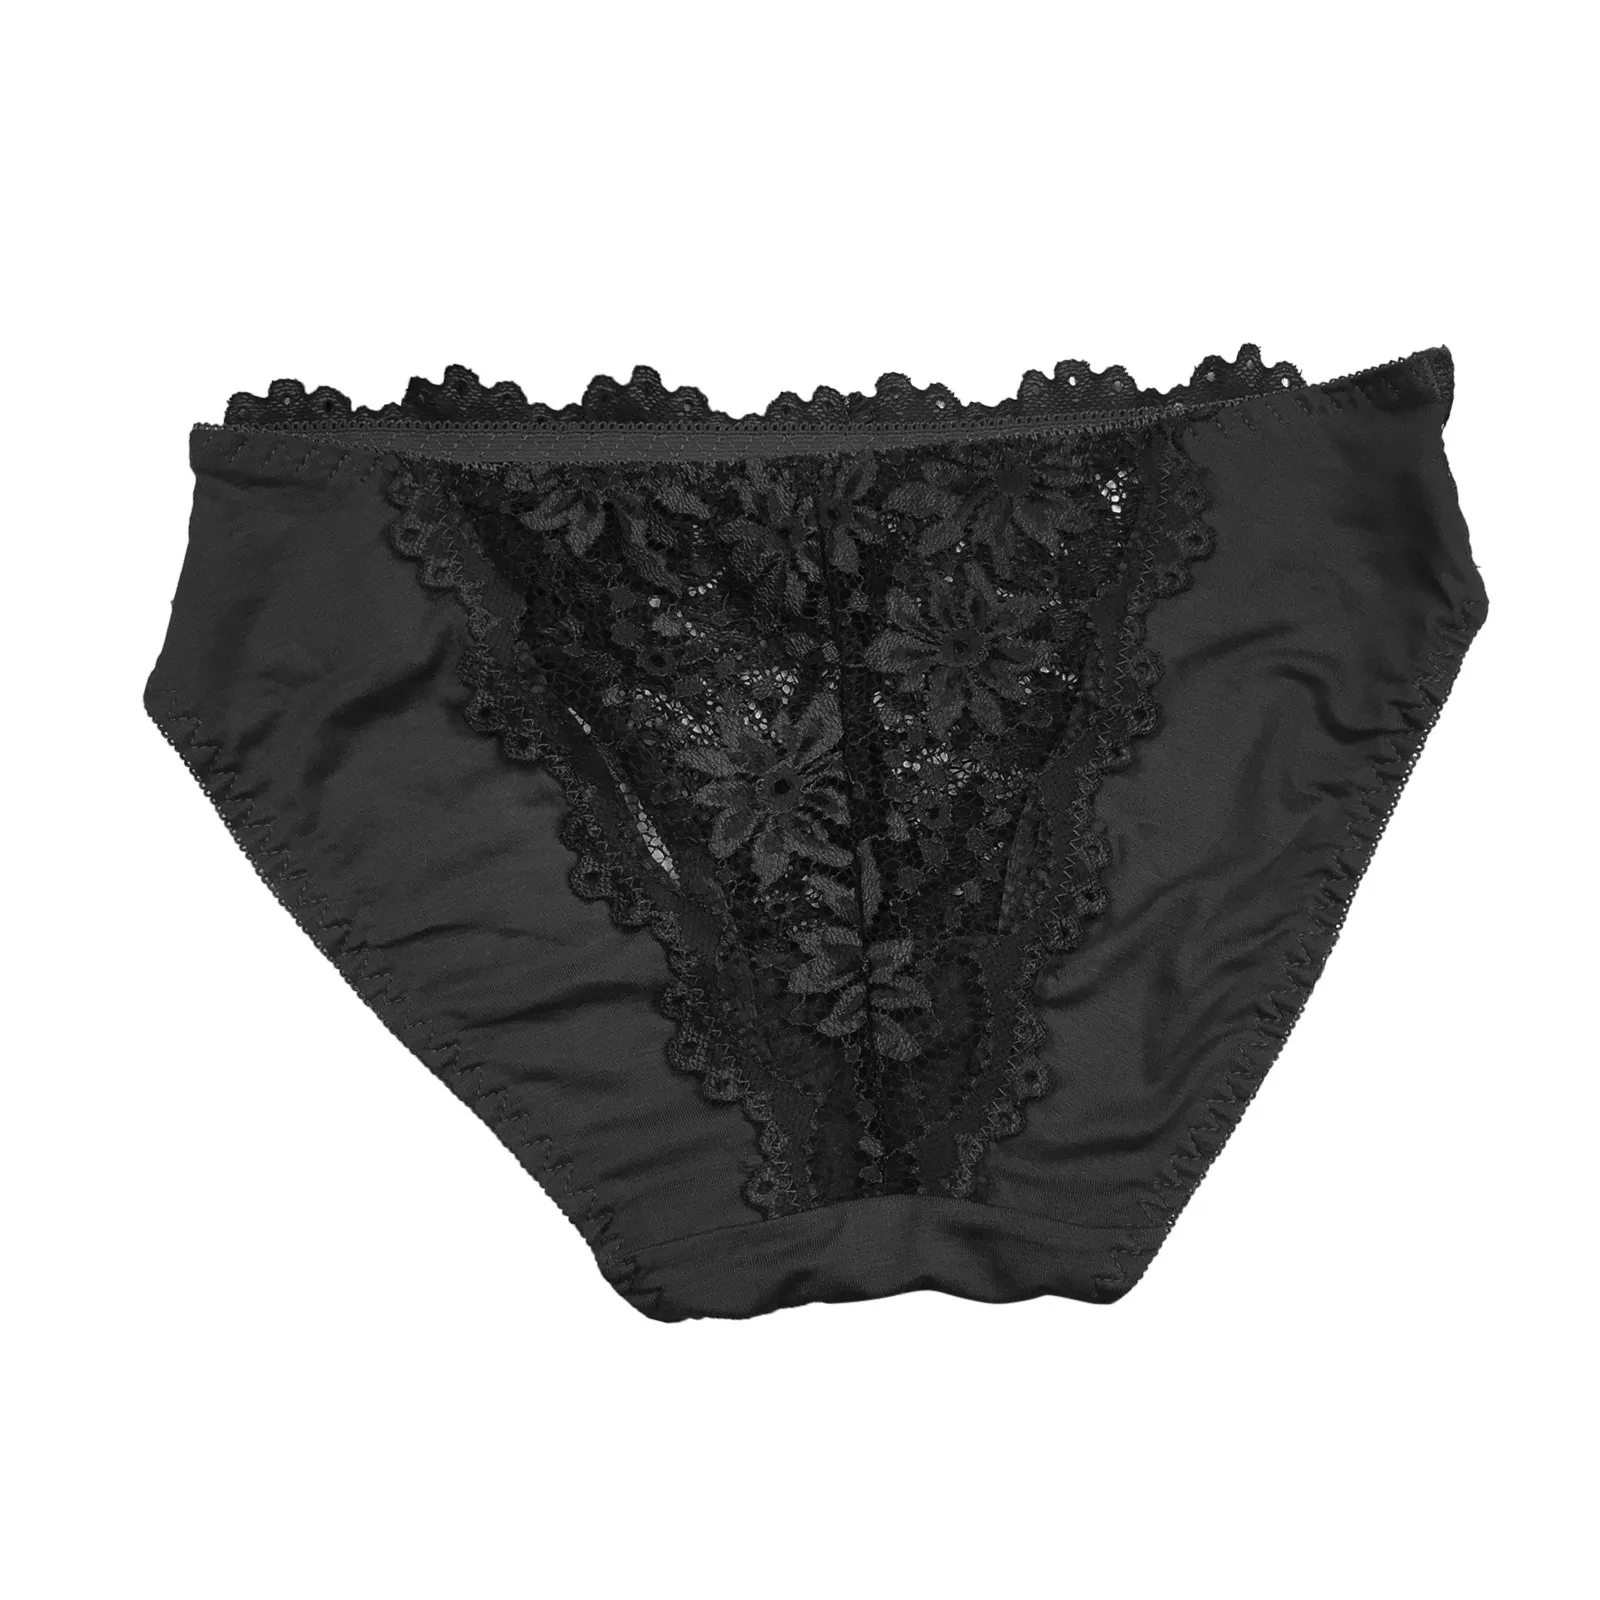 

Women Low Waist Panties Sheer Lace Sexy Lingerie Erotic Mujer Underwear Underpants Temptation Porno Babydoll Intimate Sex Briefs